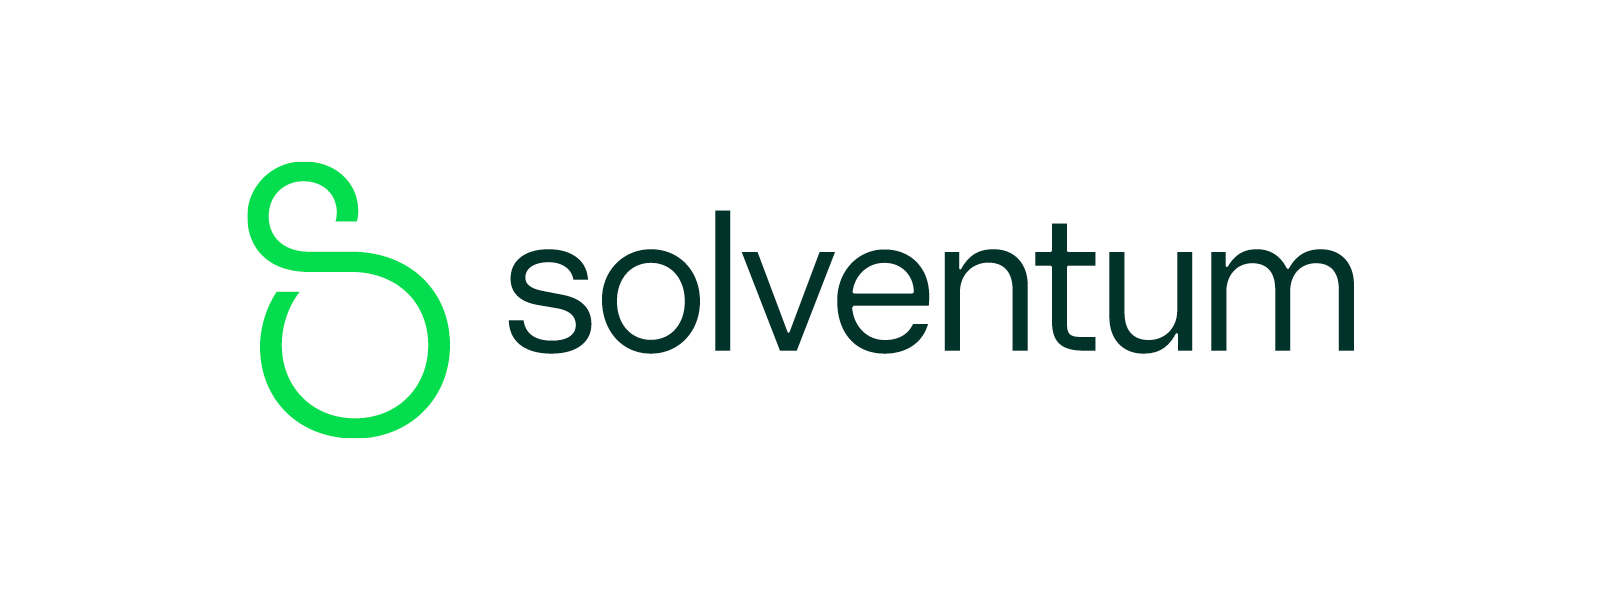 Solventum, formerly 3M Health Care